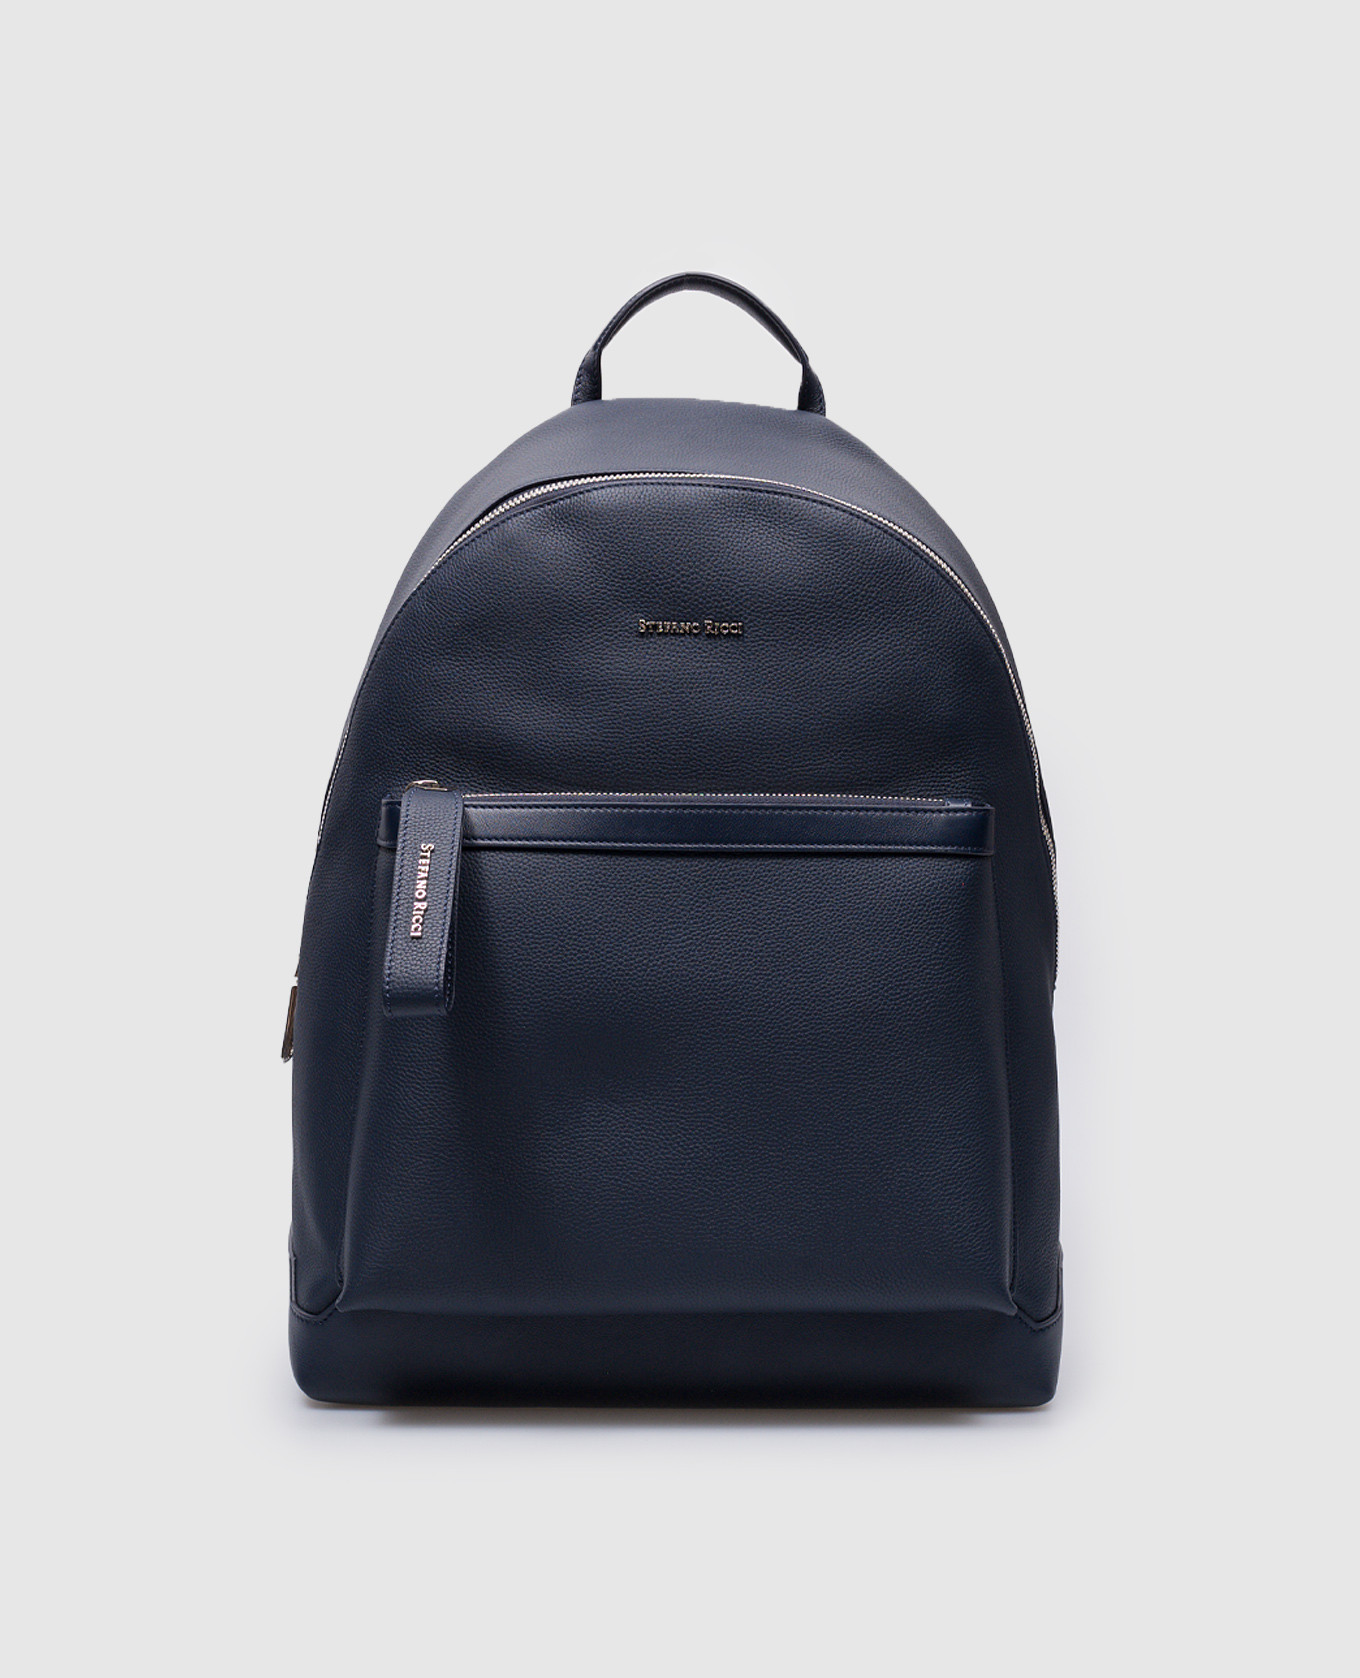 Blue leather backpack with metal logo